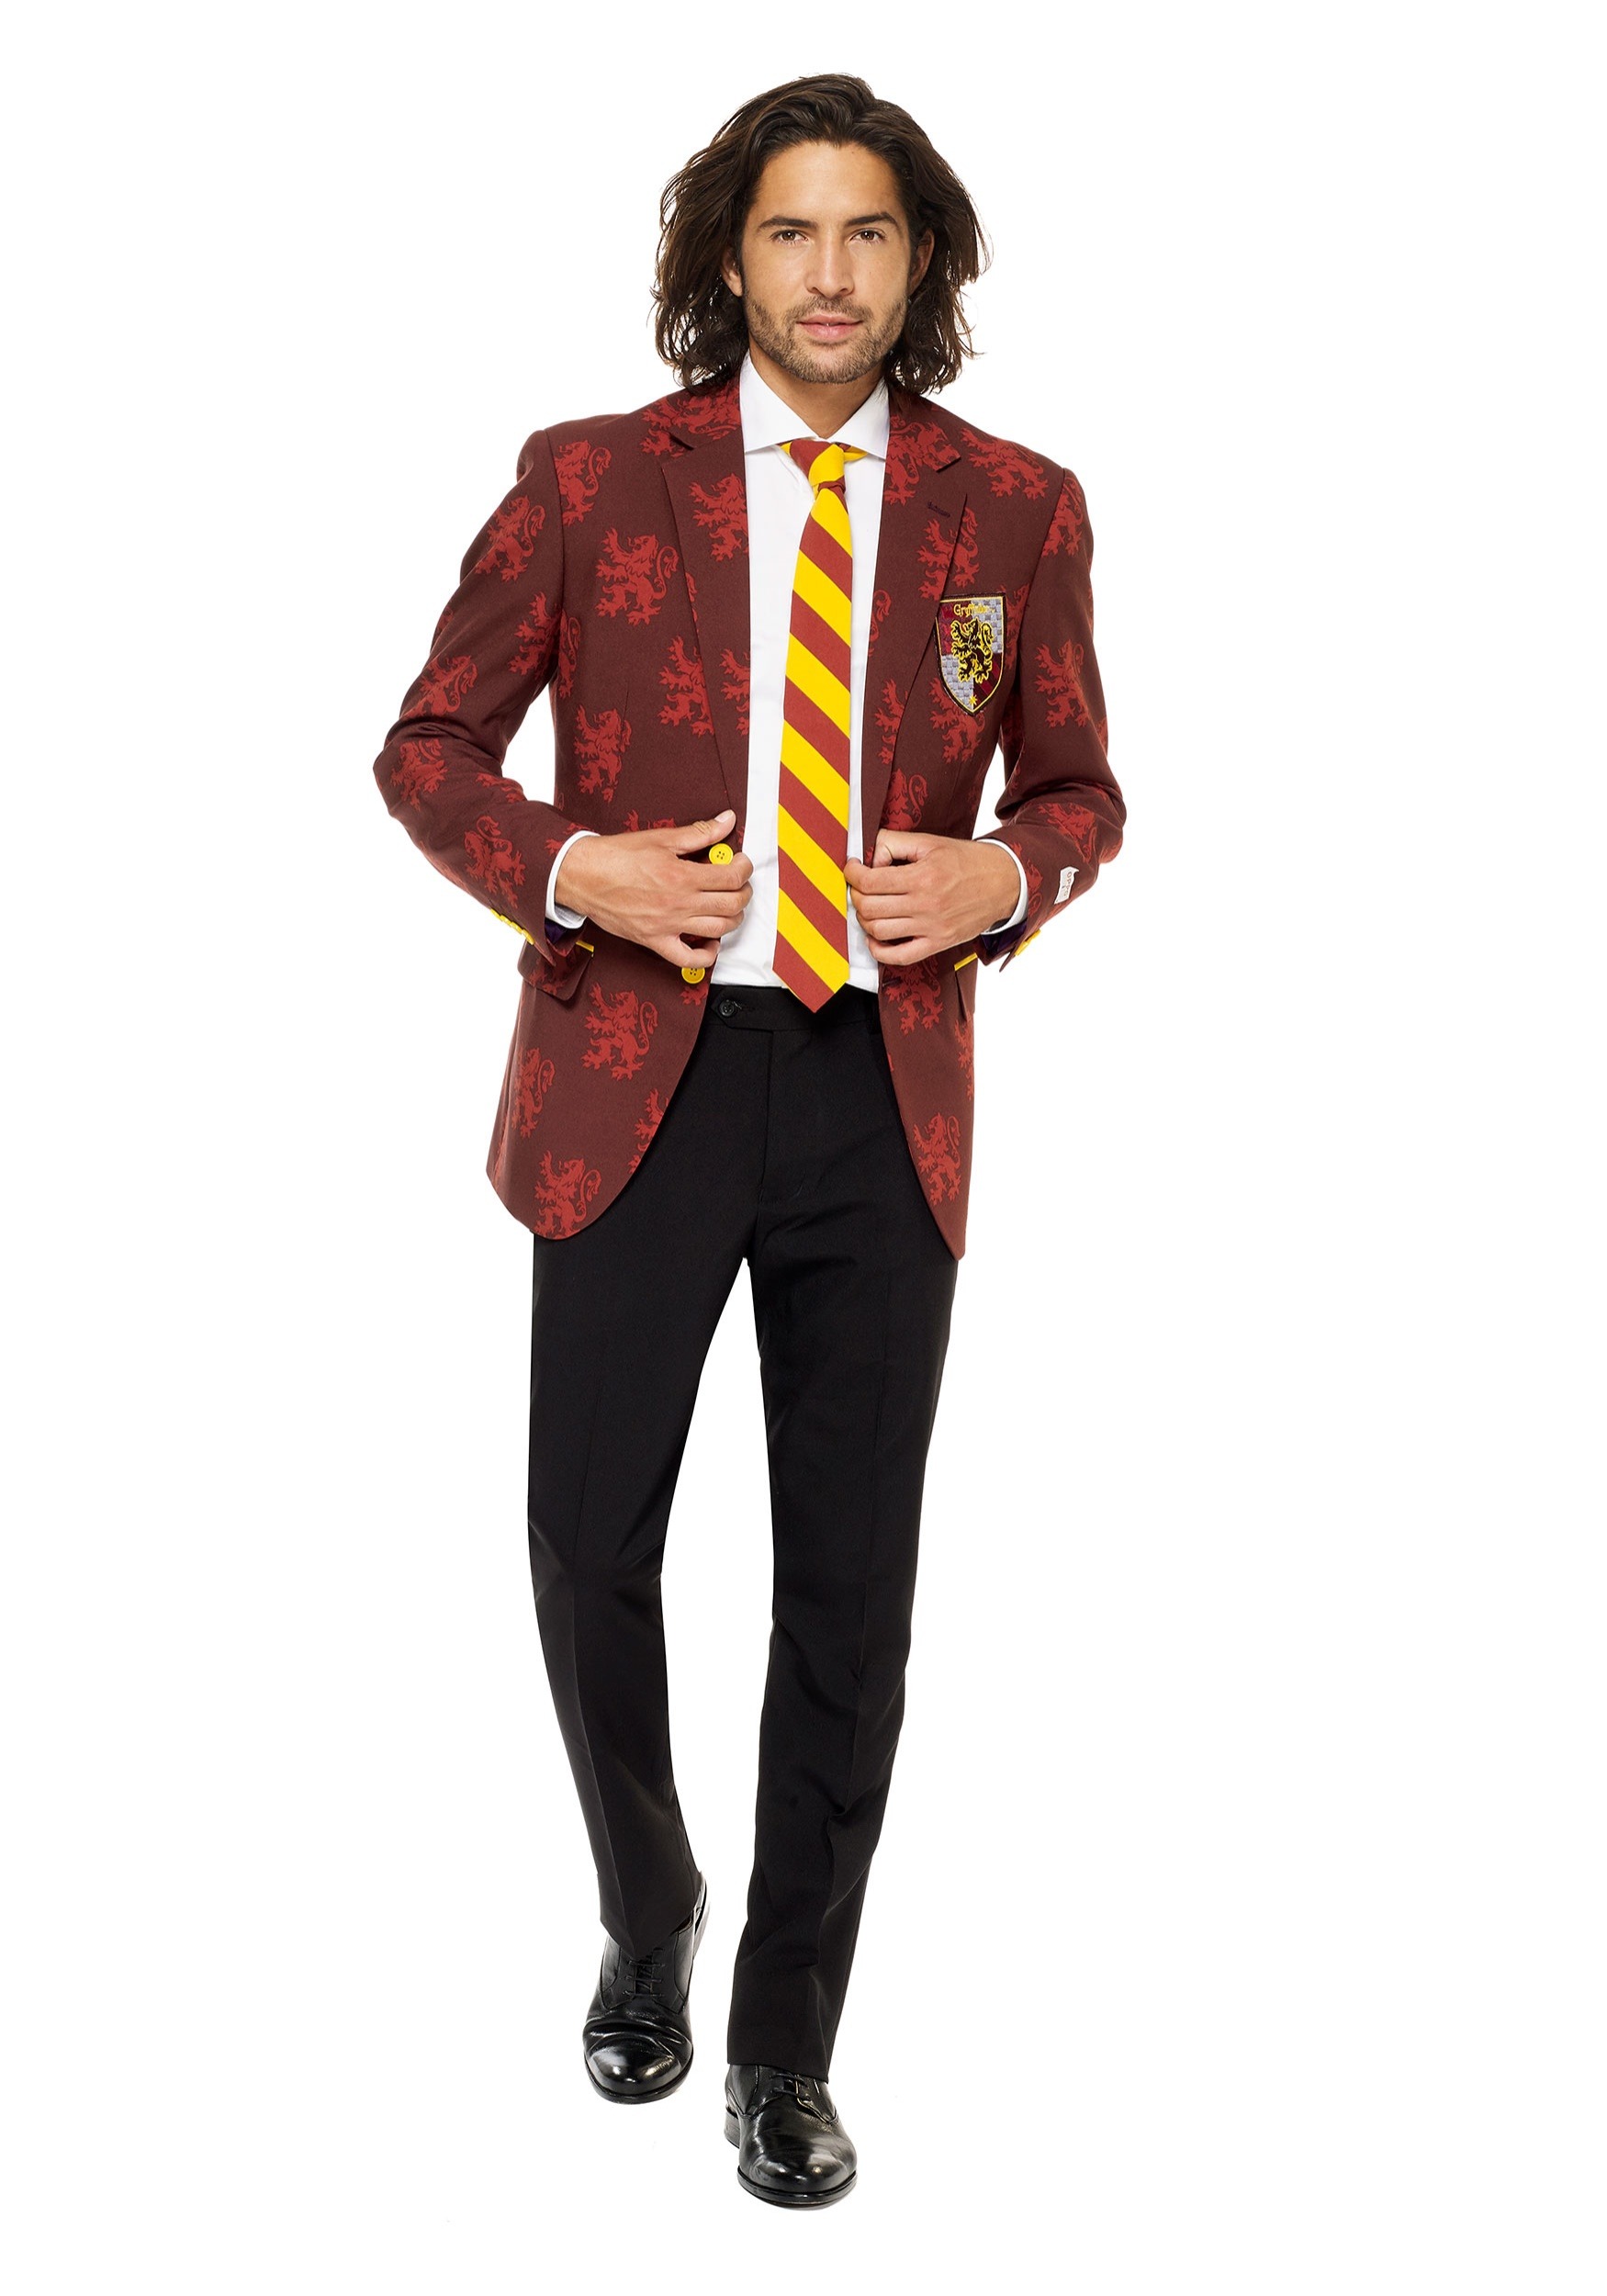 Image of Opposuits Harry Potter Men's Suit Costume ID OSOSUI0080-42